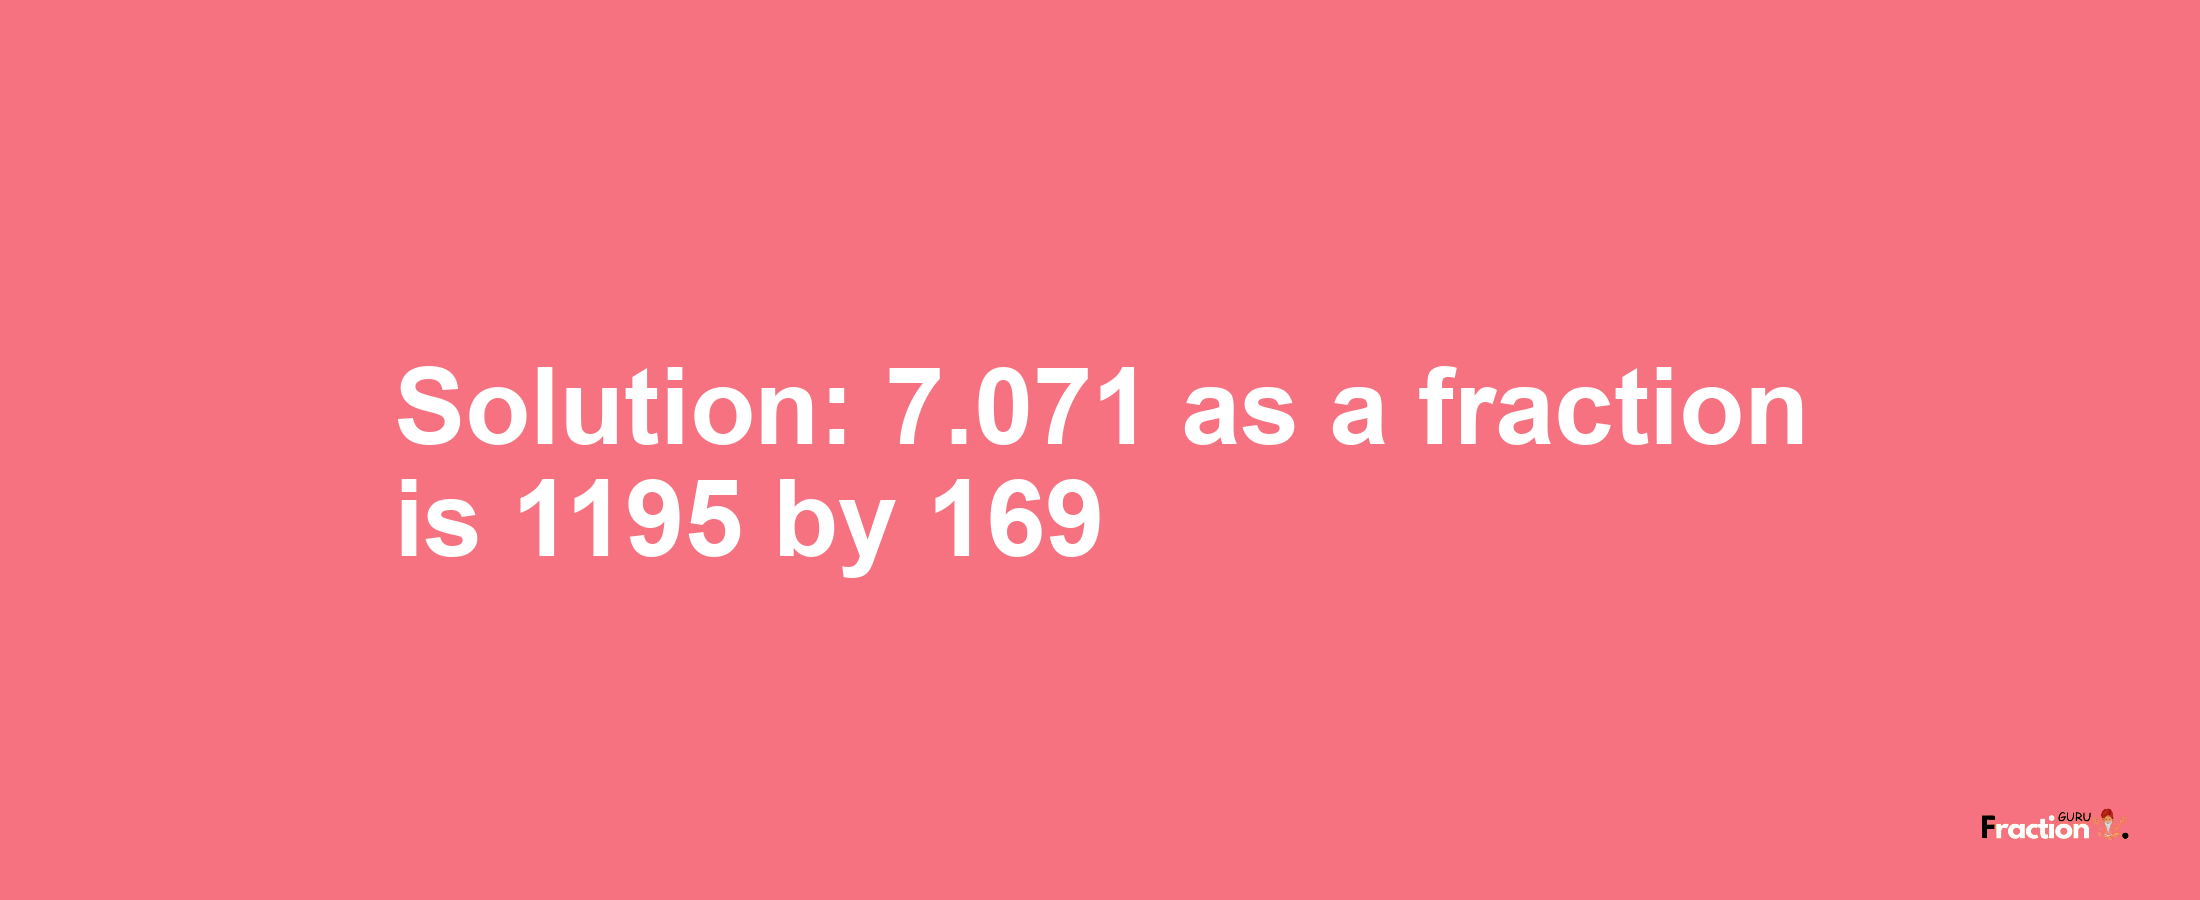 Solution:7.071 as a fraction is 1195/169